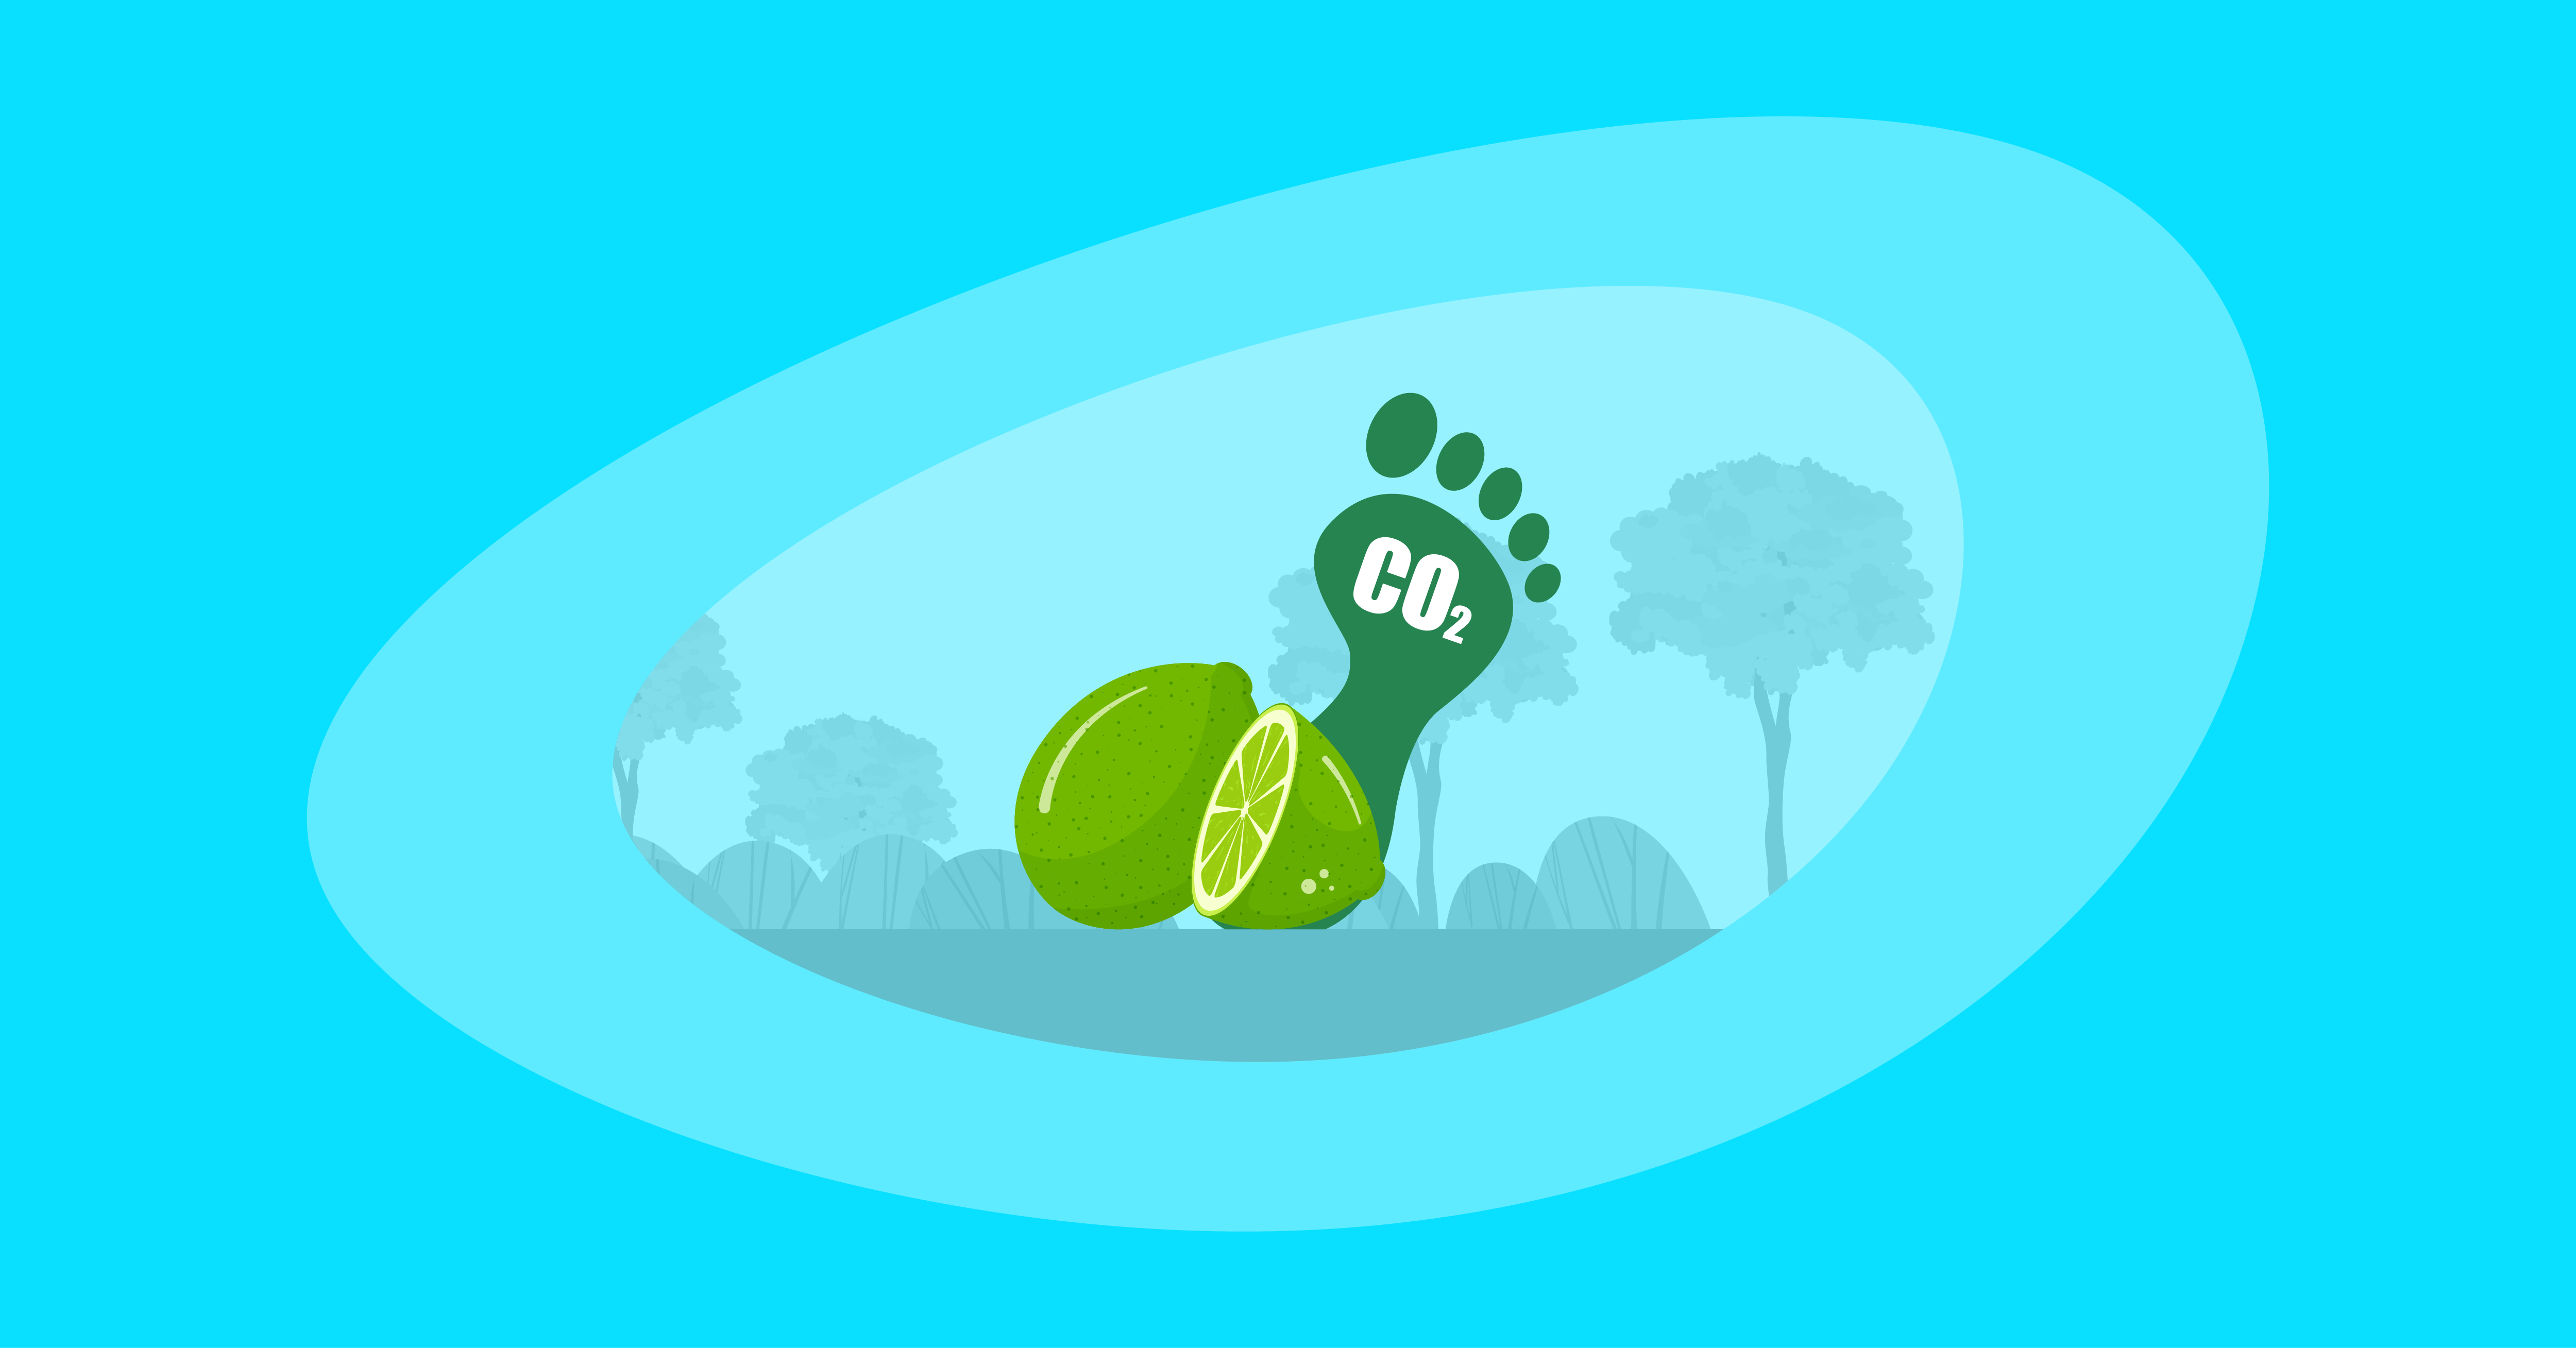 Attempted illustration of limes with their carbon footprint